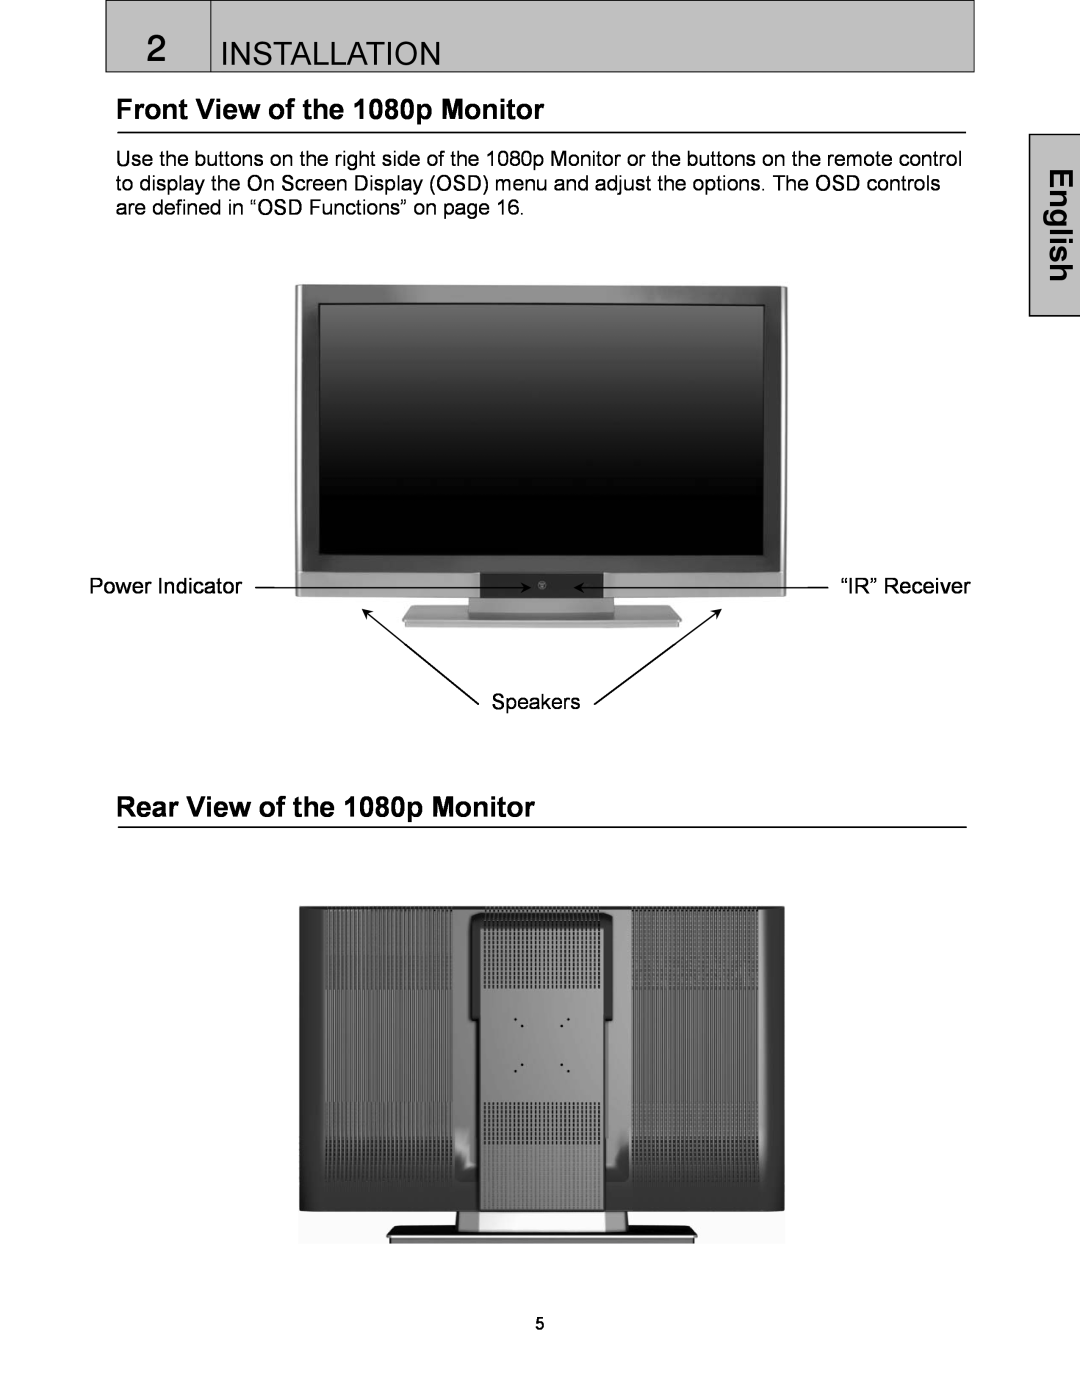 Westinghouse LVM-37w3se user manual Front View of the 1080p Monitor, Rear View of the 1080p Monitor, Installation, English 